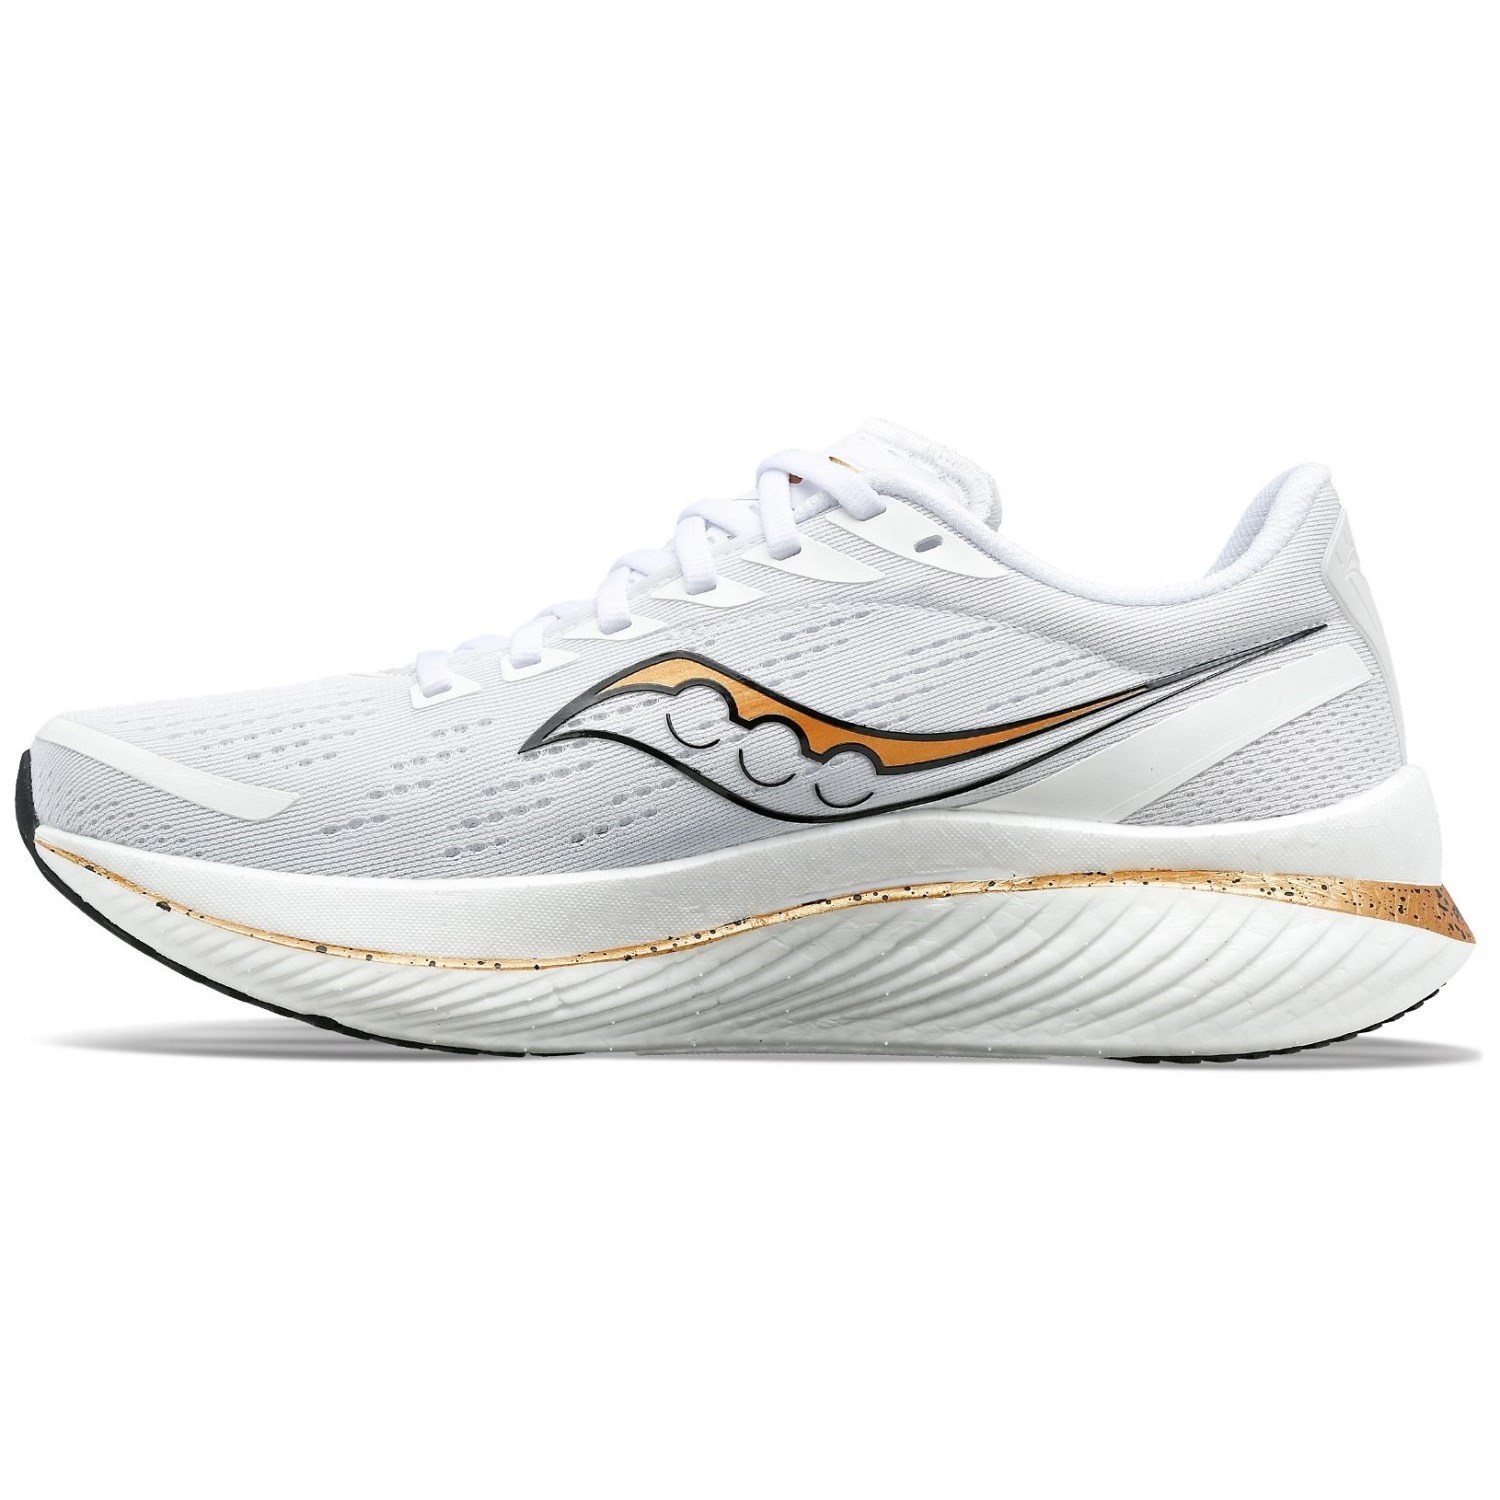 Saucony Endorphin Speed 3 - Mens Running Shoes - White/Gold | Sportitude